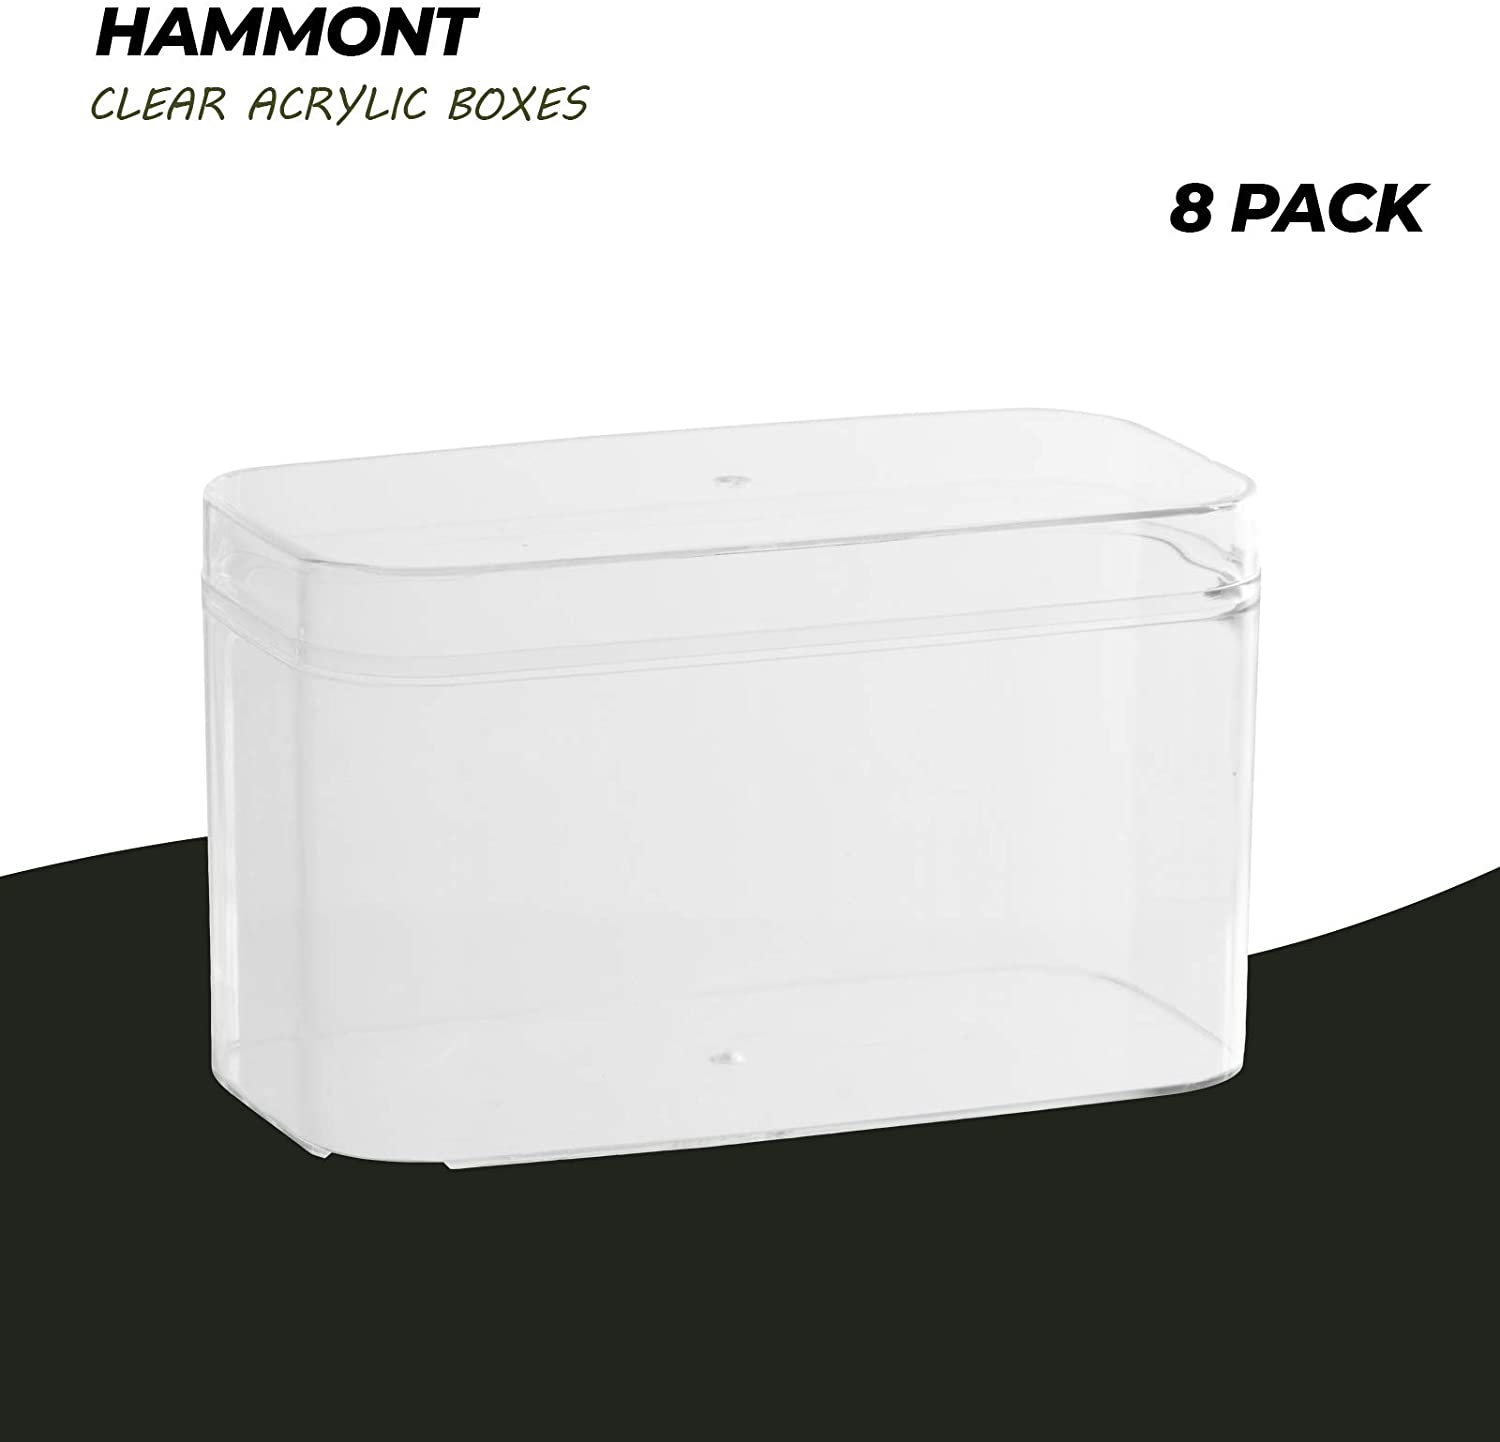 Clear Acrylic Boxes 4.75X2.25X2.75 8 Pack – Hammont